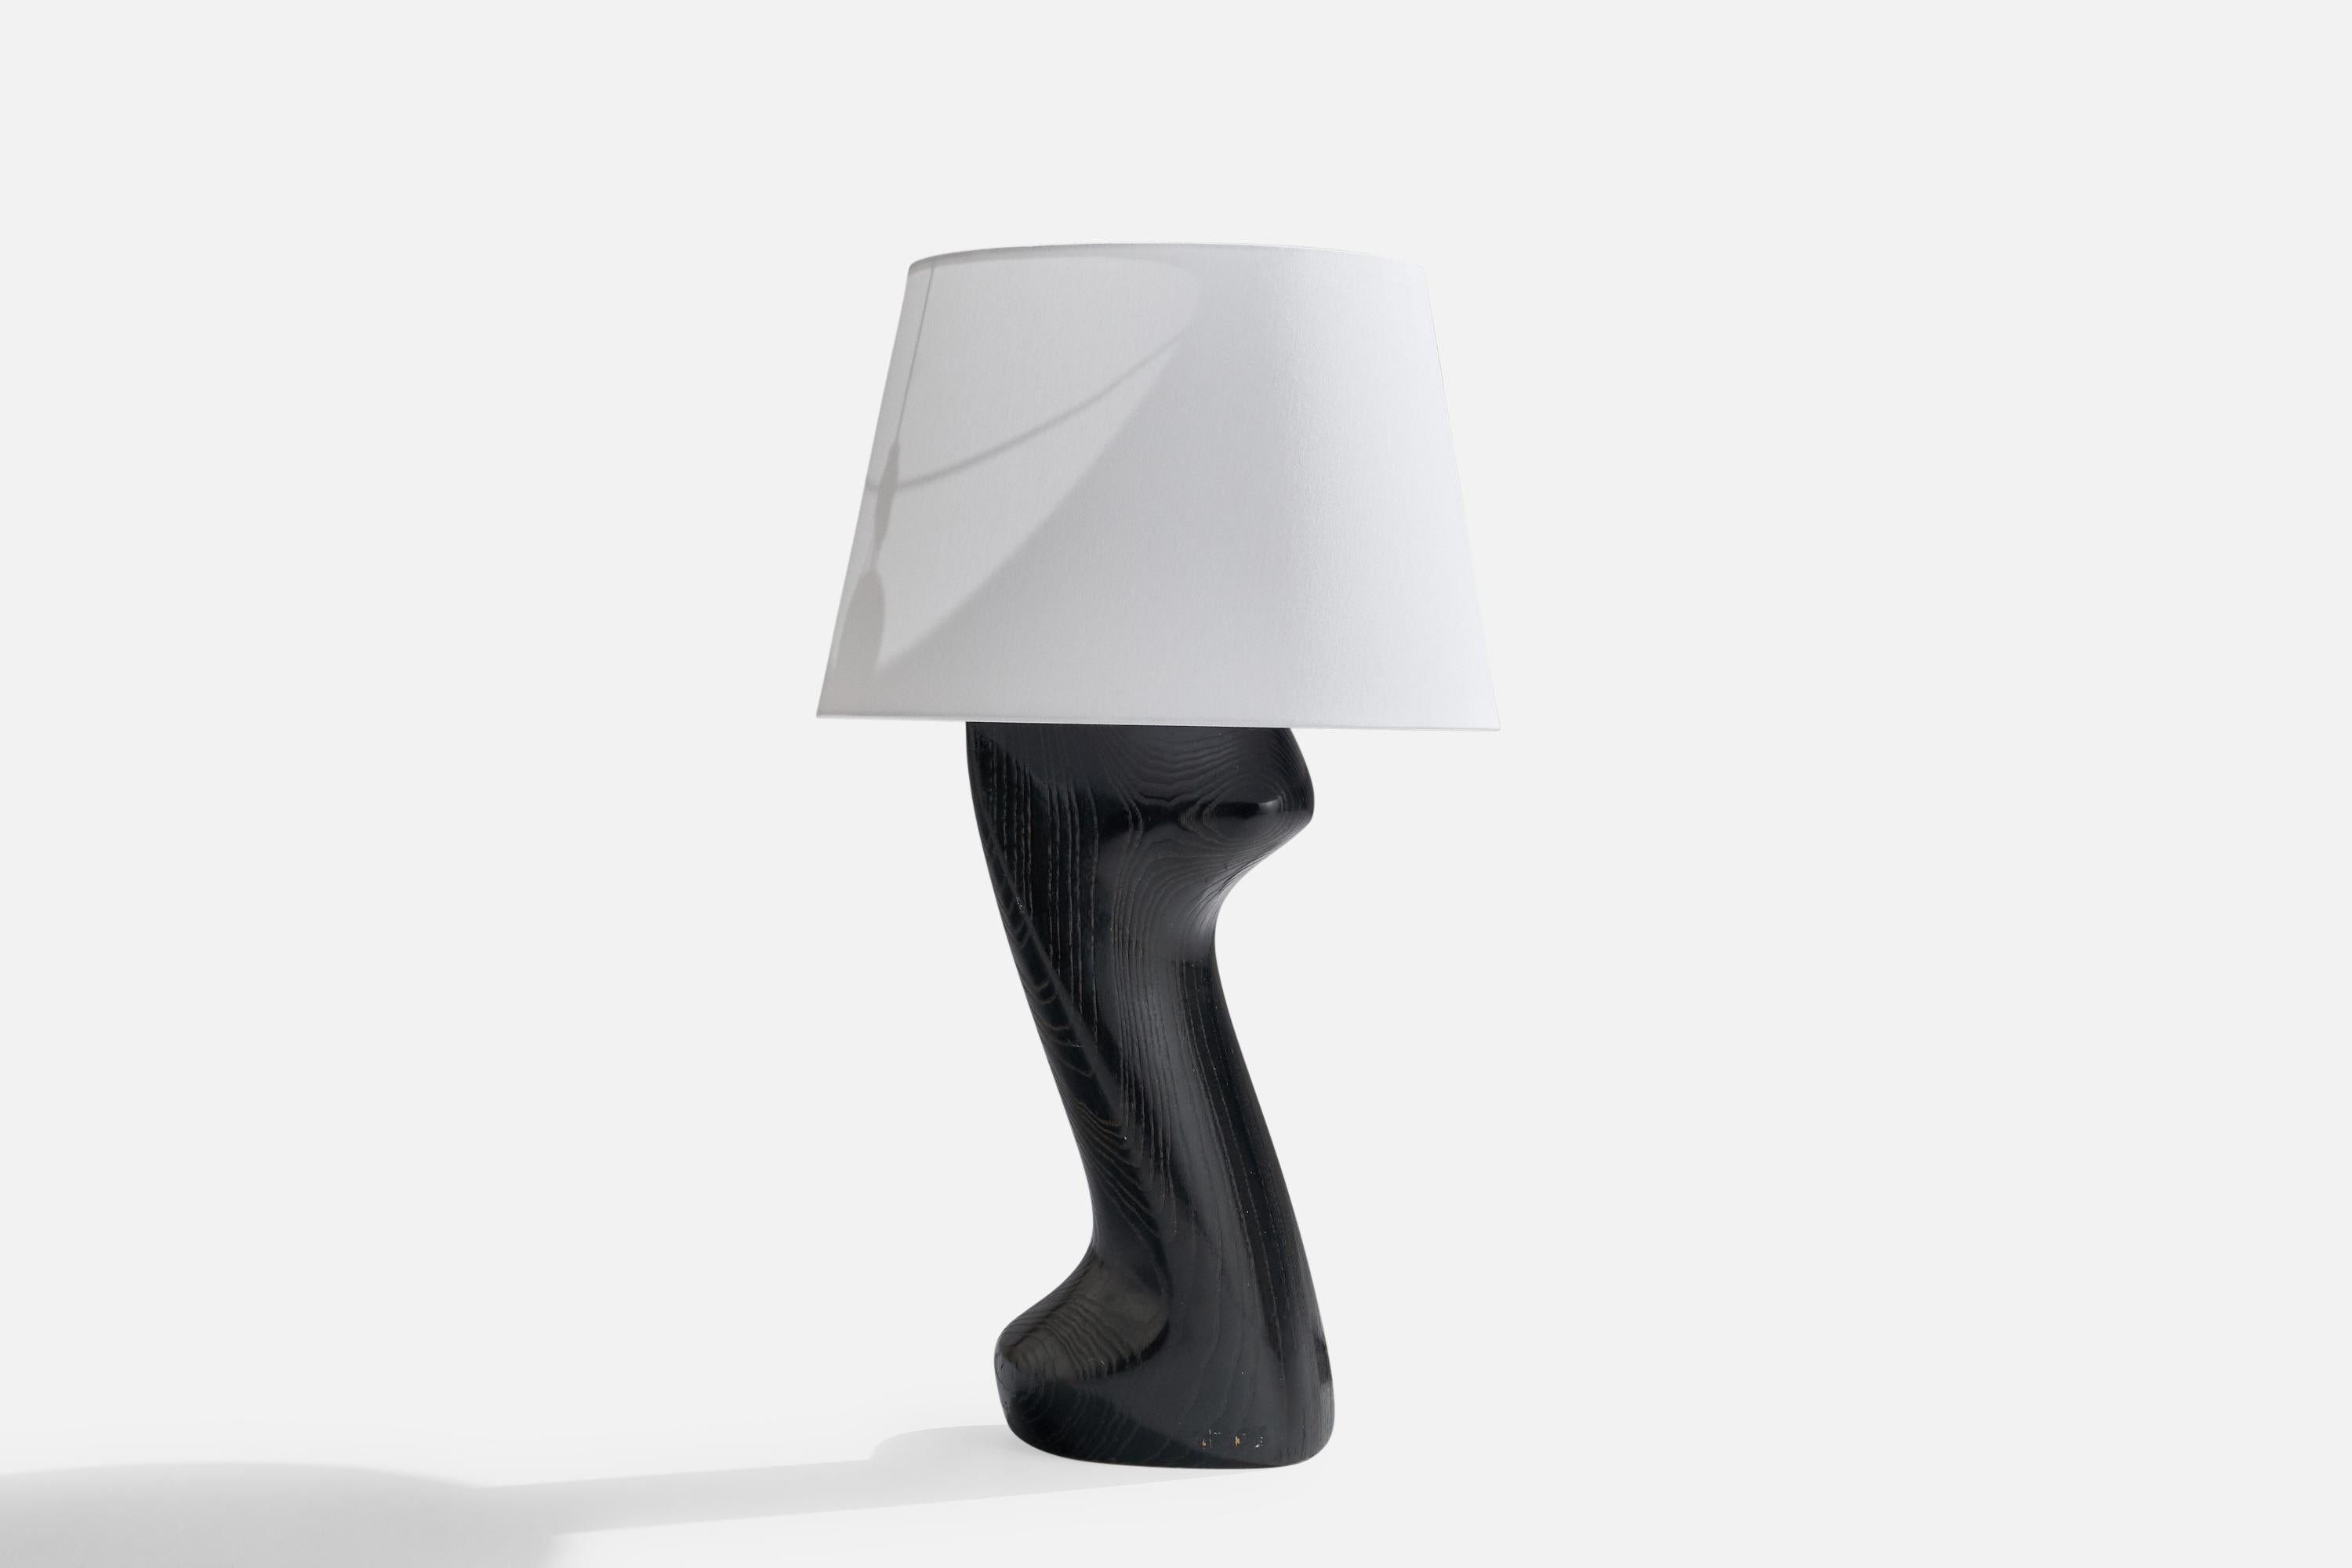 A black-cerused oak table lamp attributed to Yasha Heifetz, USA, 1950s.

Dimensions of Lamp (inches): 23.50” H x 8” Diameter
Dimensions of Shade (inches): 9” Top Diameter x 12”  Bottom Diameter x 9” H
Dimensions of Lamp with Shade (inches): 28” H x